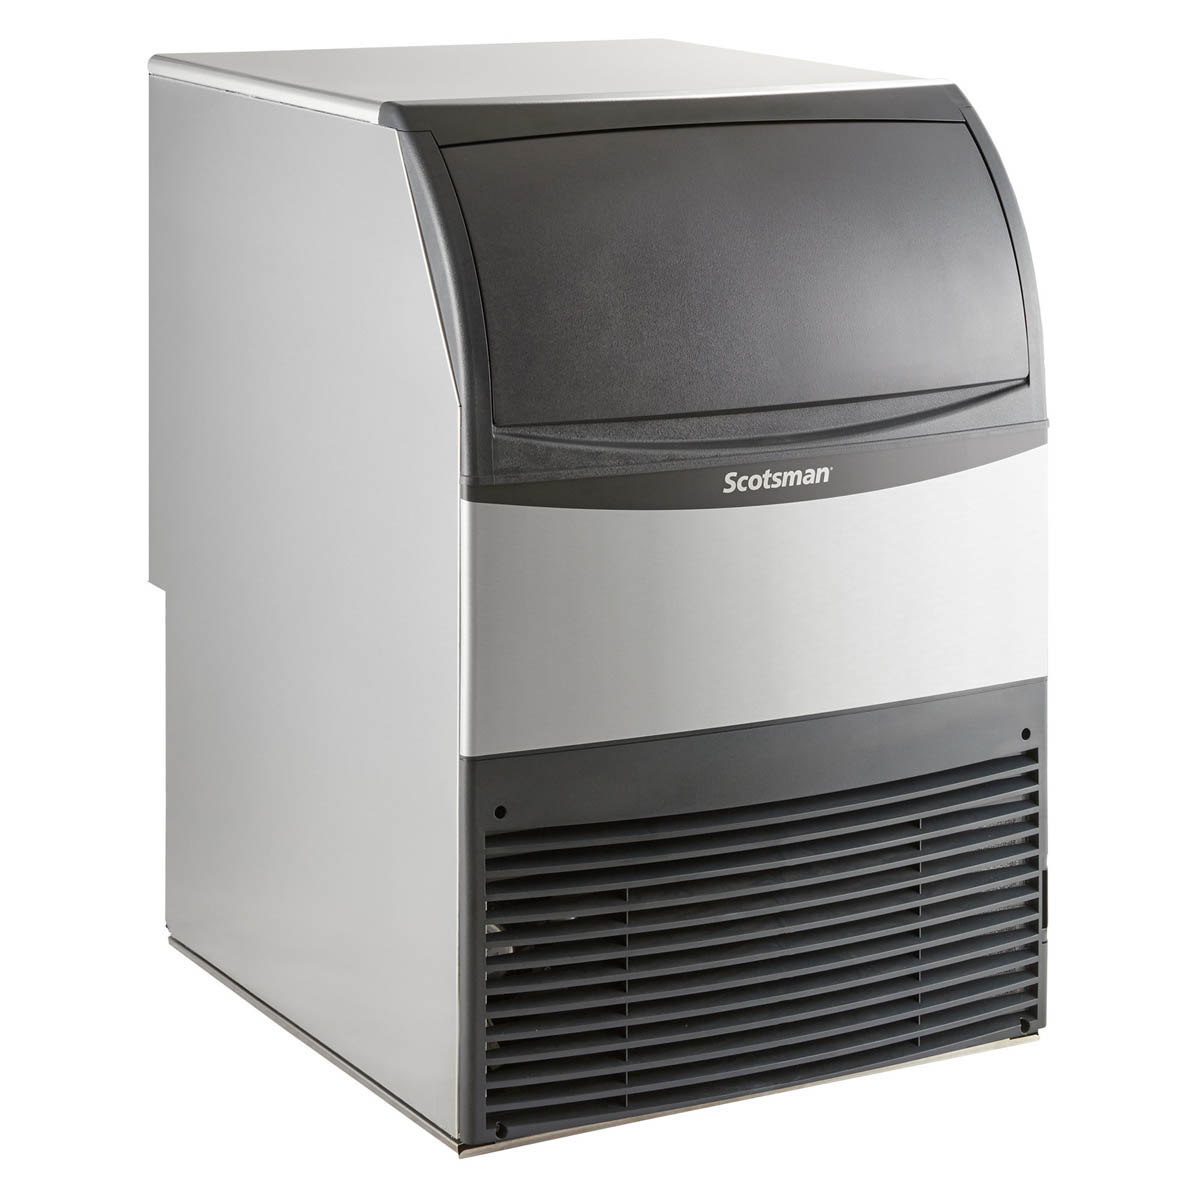 Scotsman UF424W-1 Provides Soft and Slow Melting For Your Service and Displays, Chef's Deal